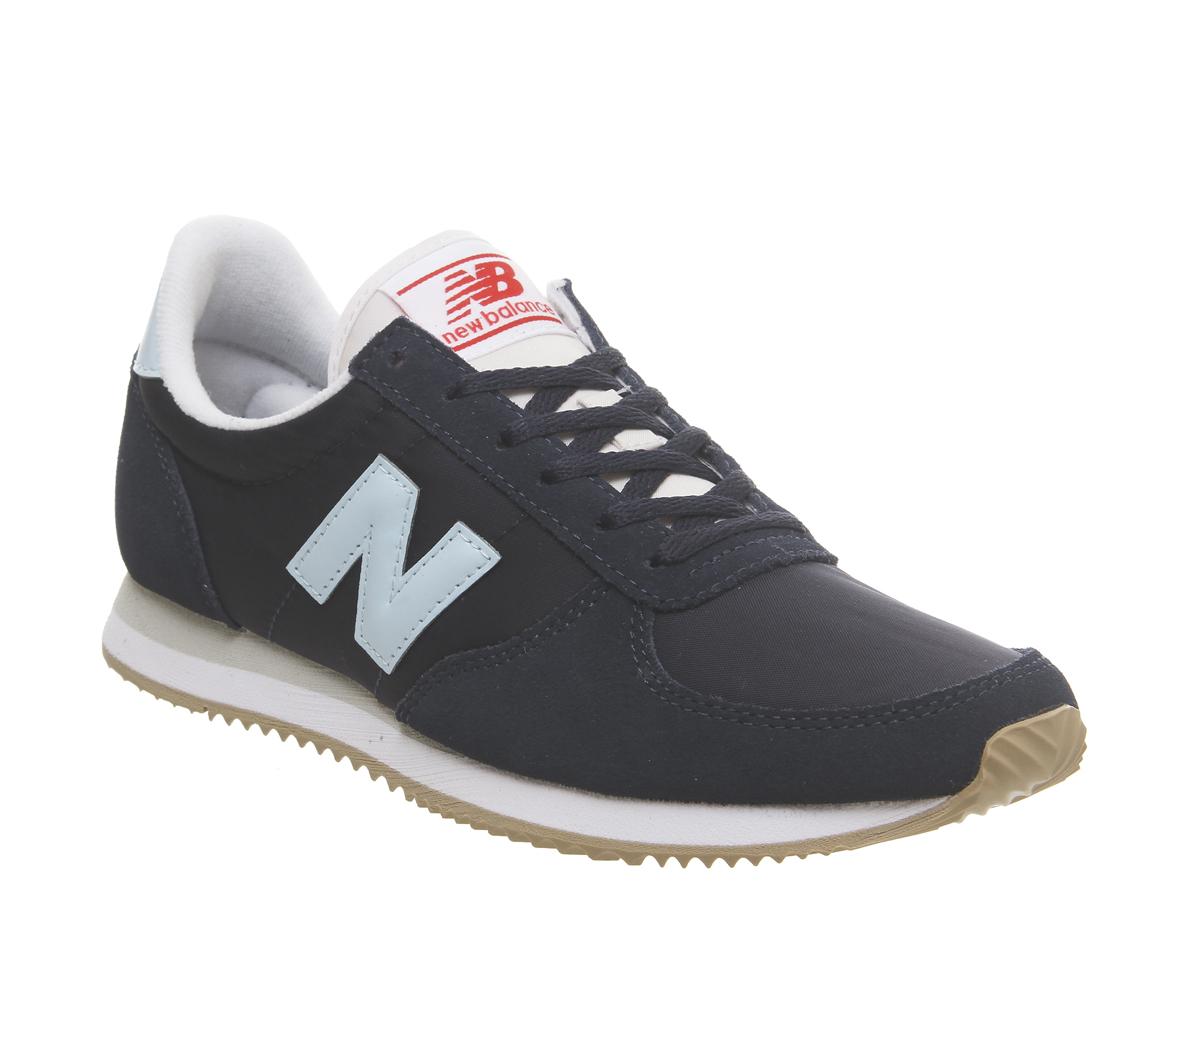 New Balance Wl220 Trainers Pigment Air - Hers trainers